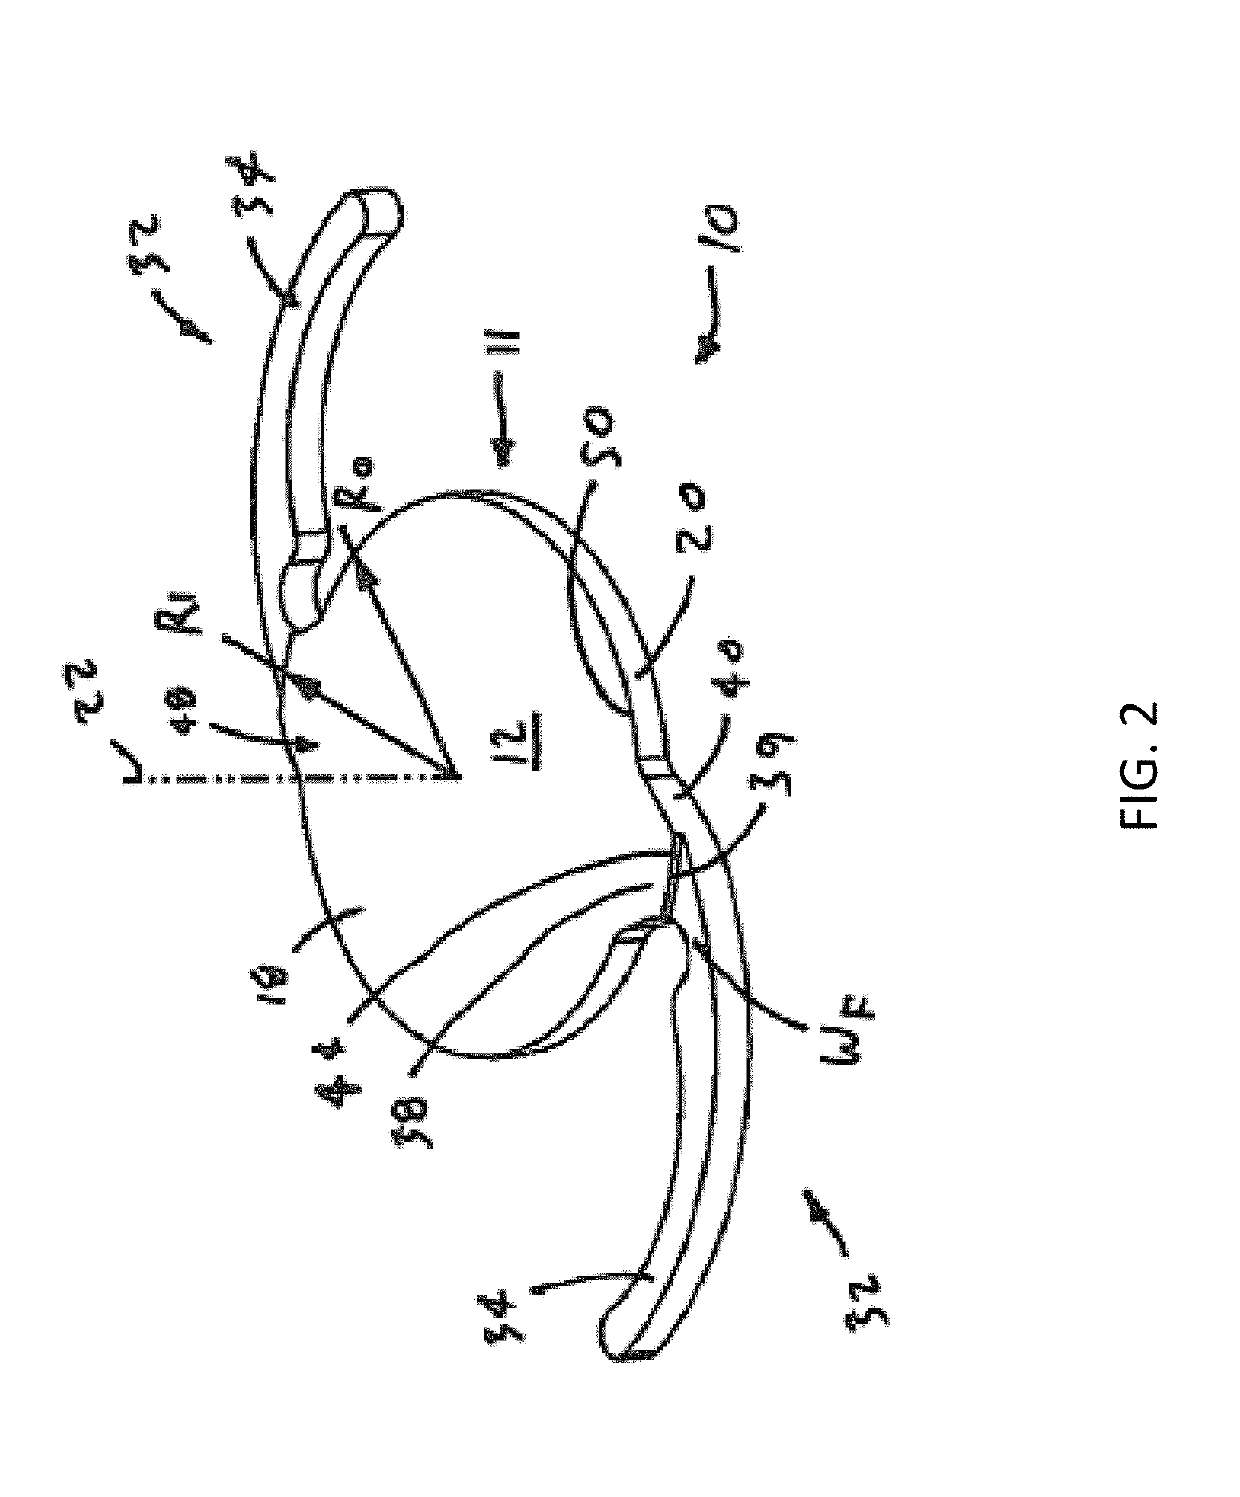 Methods and systems for changing a refractive property of an implantable intraocular lens